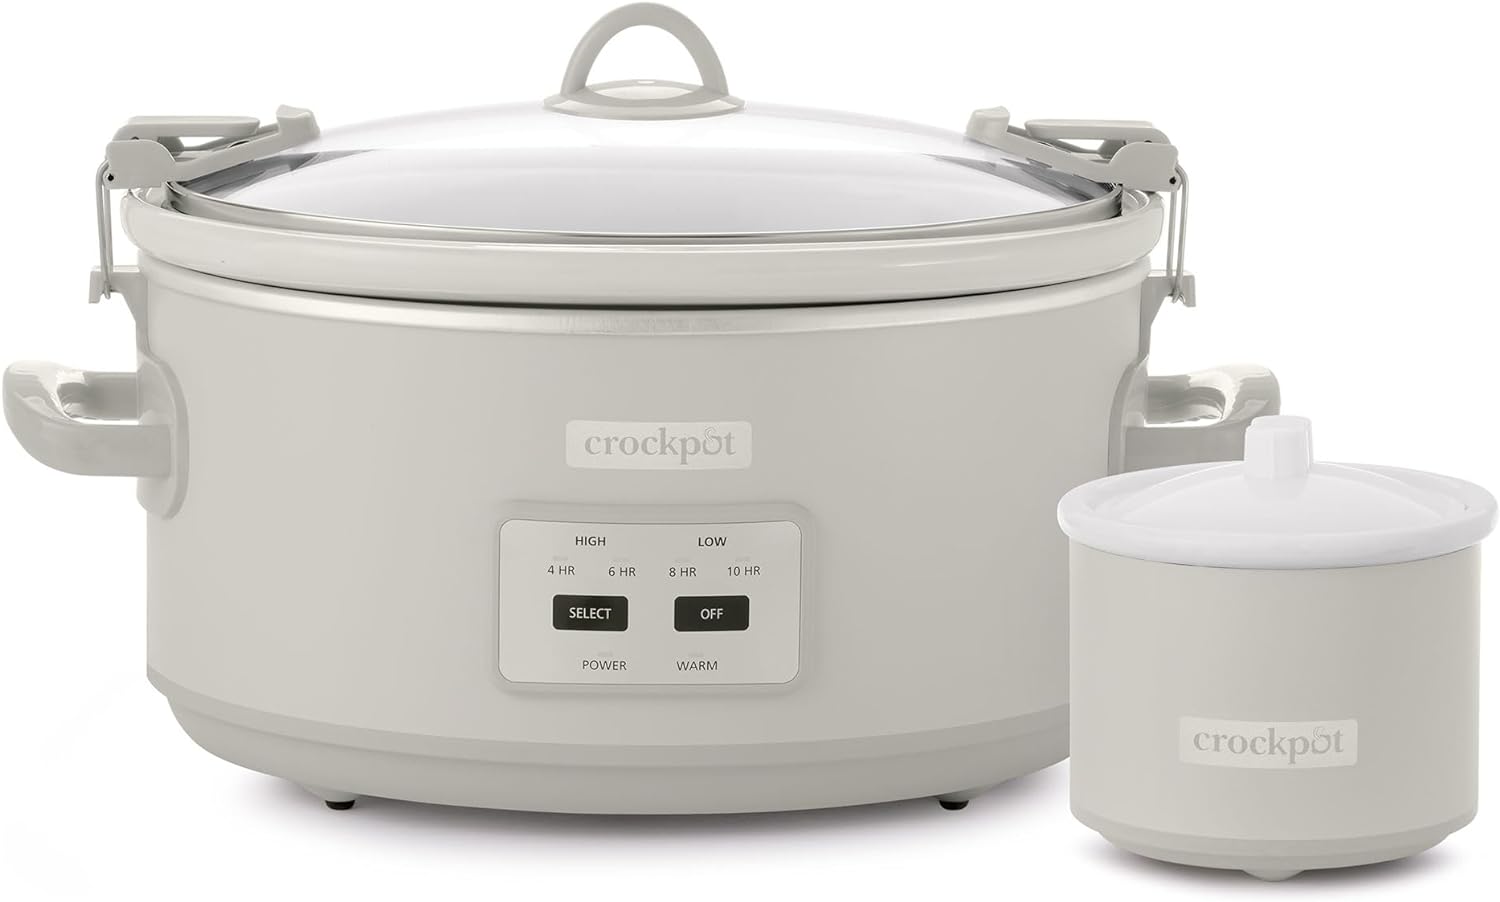 Crock-Pot 7 Quart Cook and Carry Slow Cooker with Touch Control, 4 Pre Programmed Settings, Removable Stoneware, and Locking Lid, Mushroom